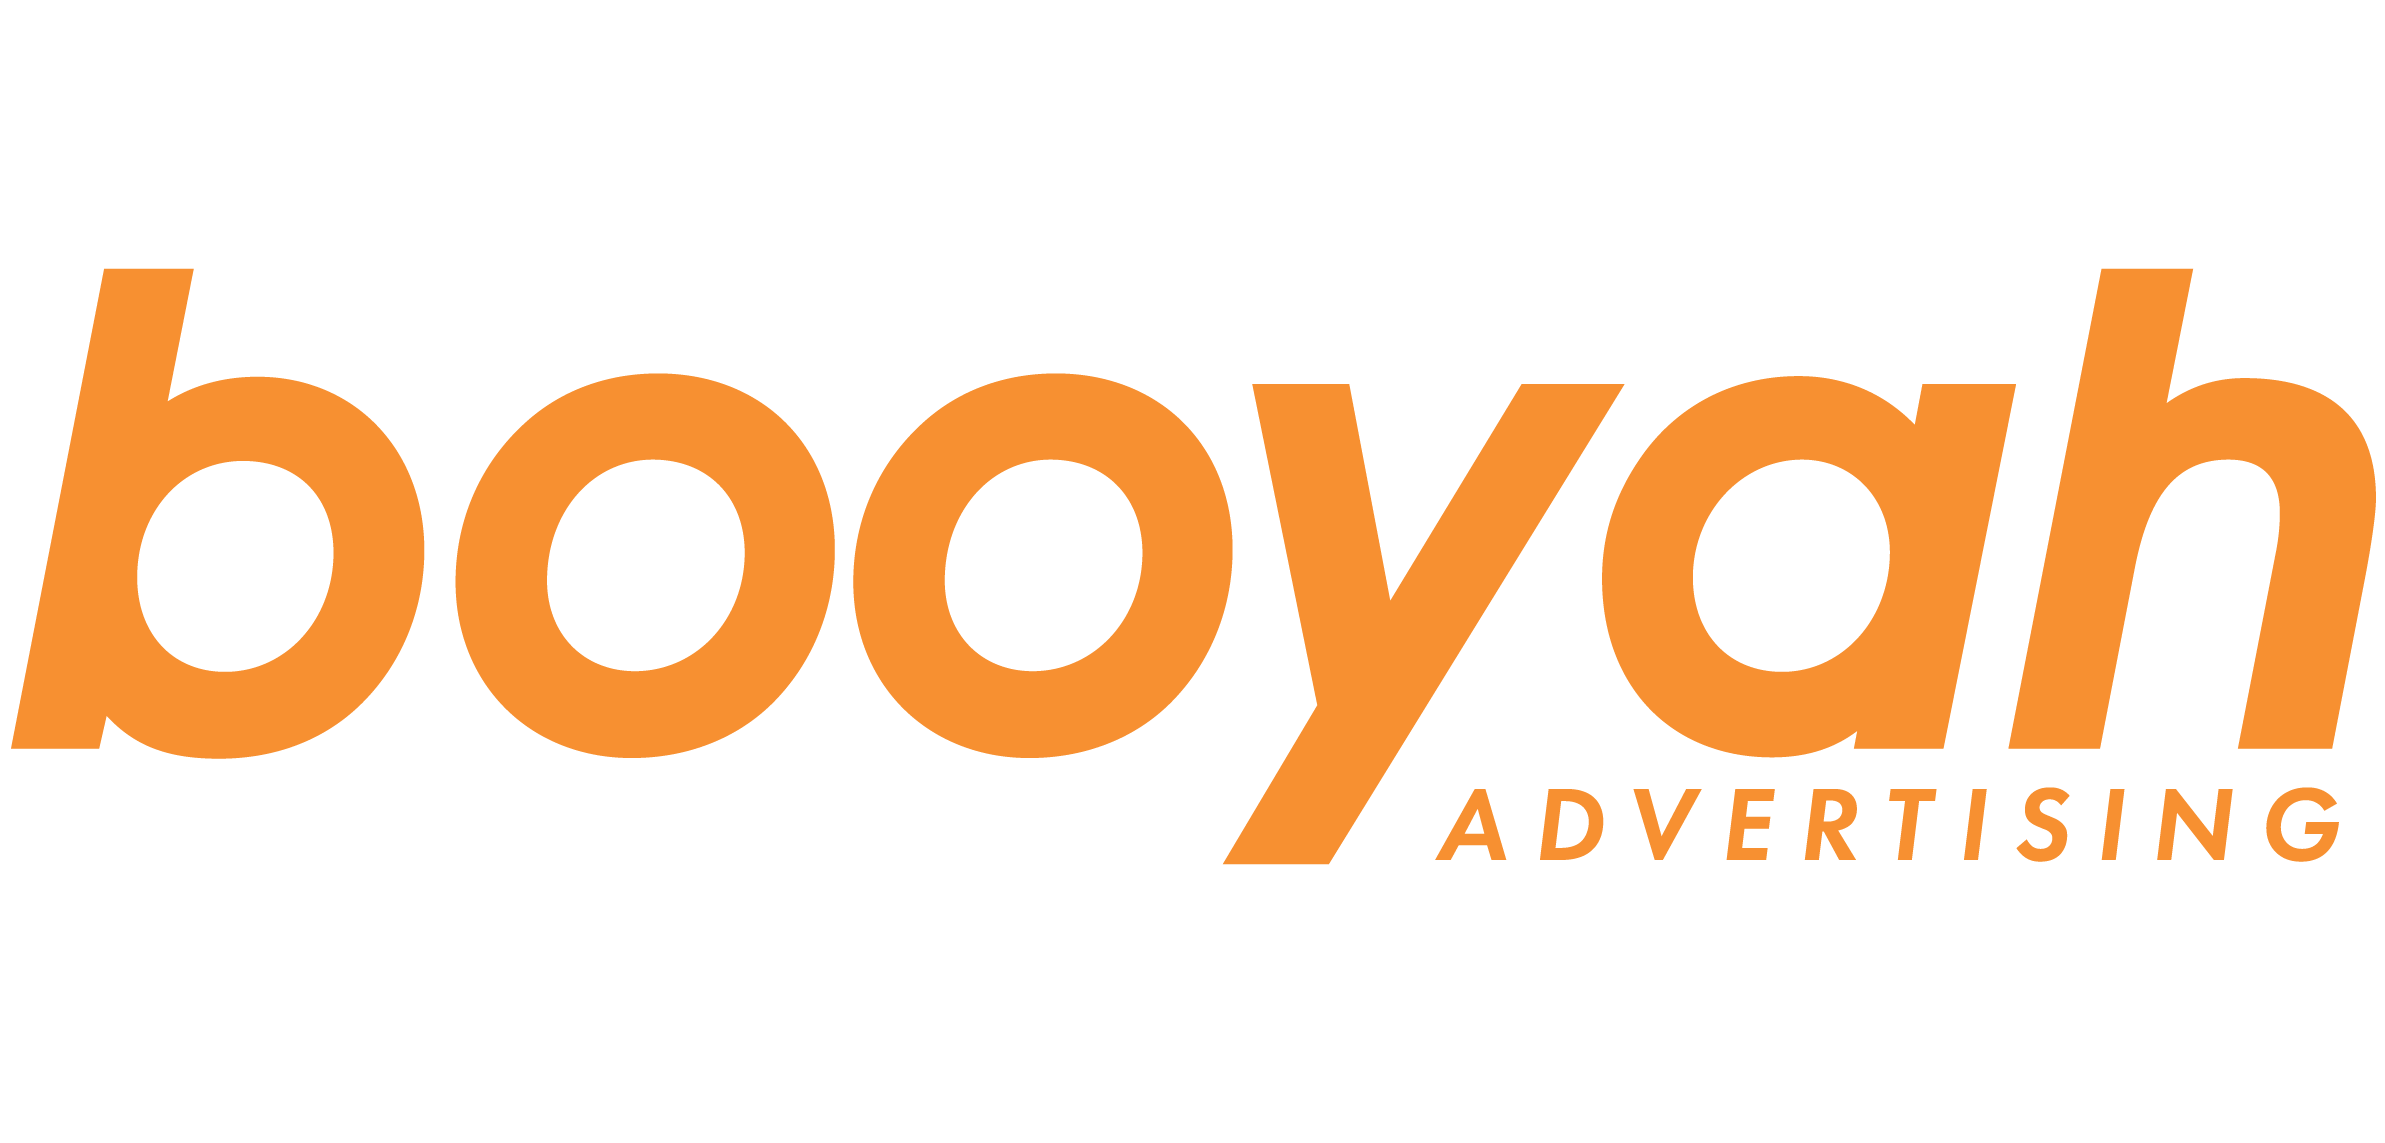 Booyah Advertising Acquires Denver-Based FiveFifty